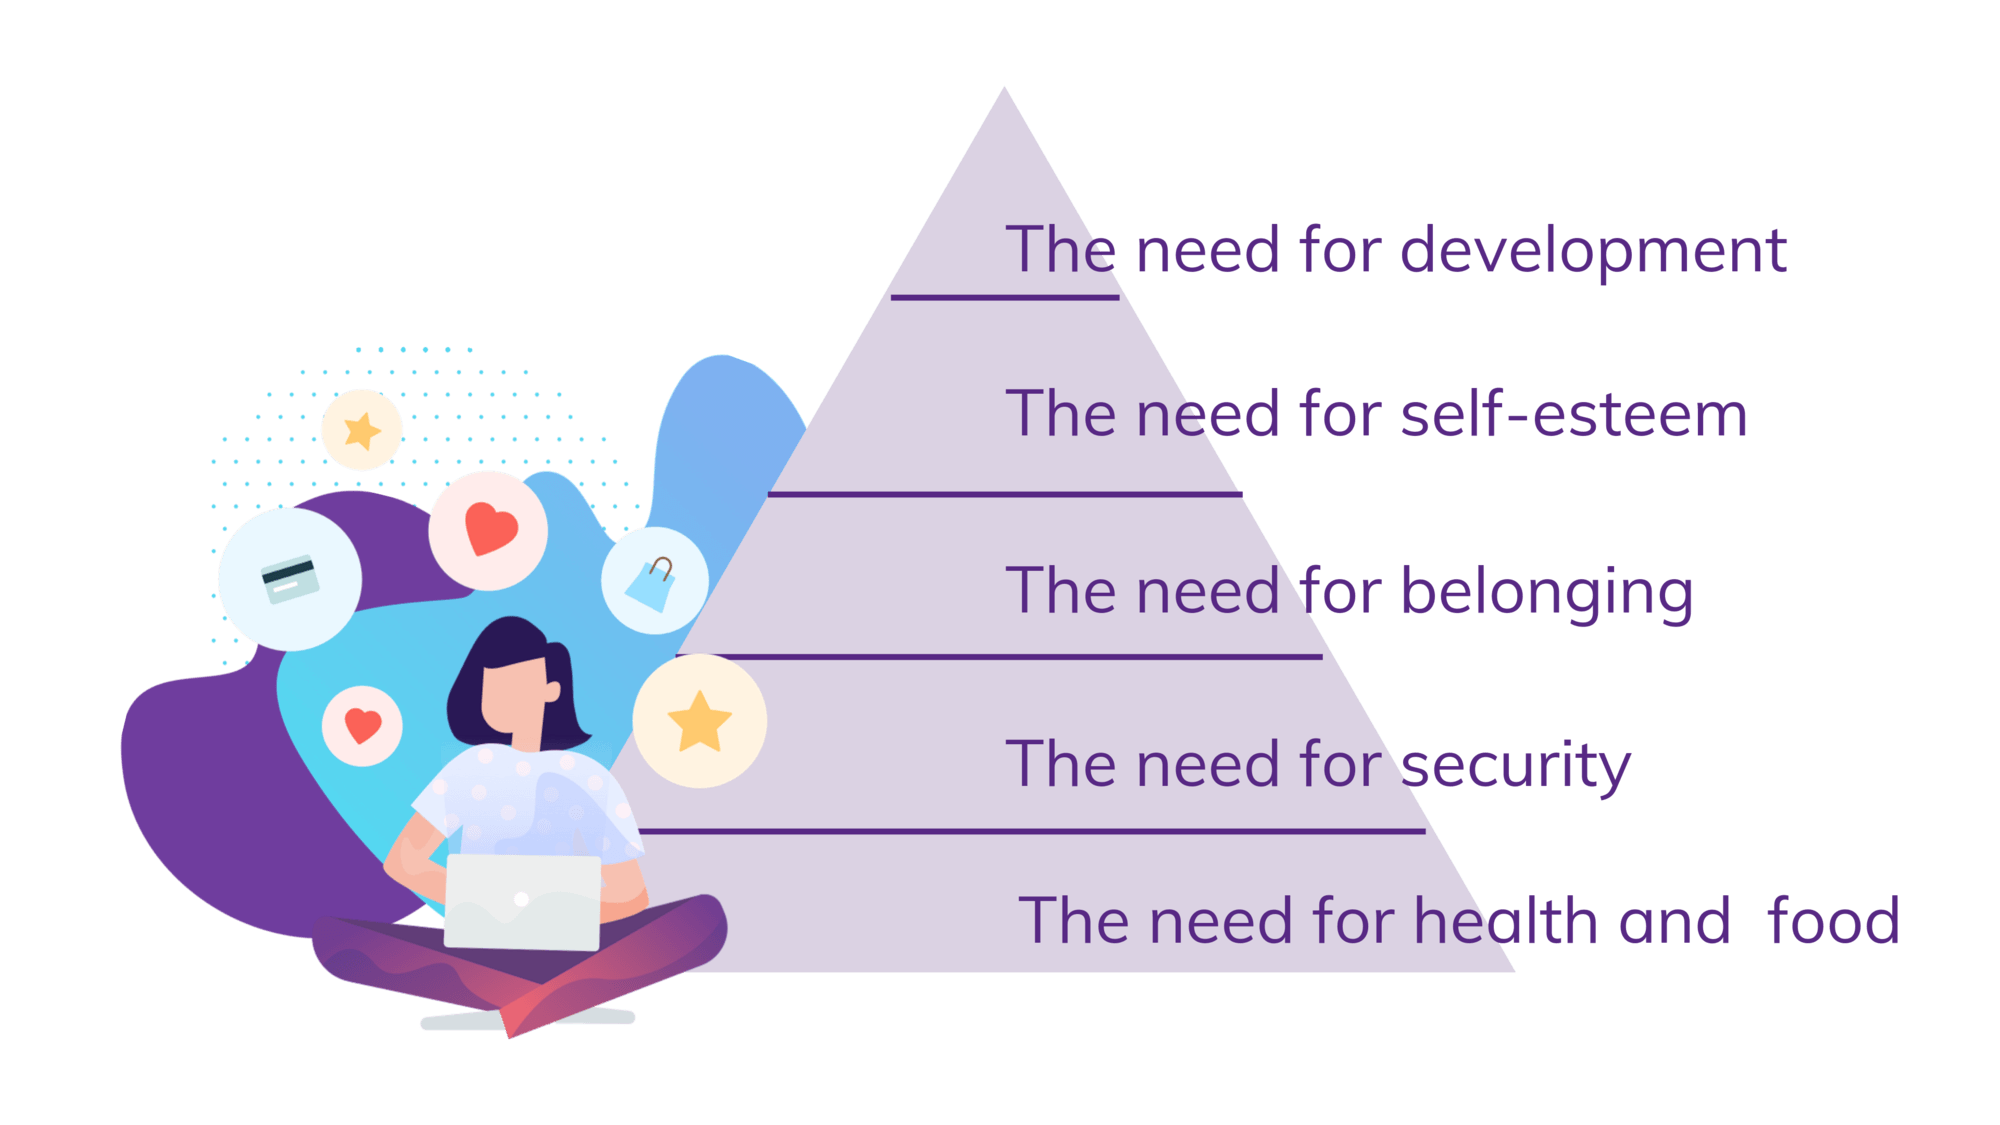 Maslows Hierarchy Of Needs